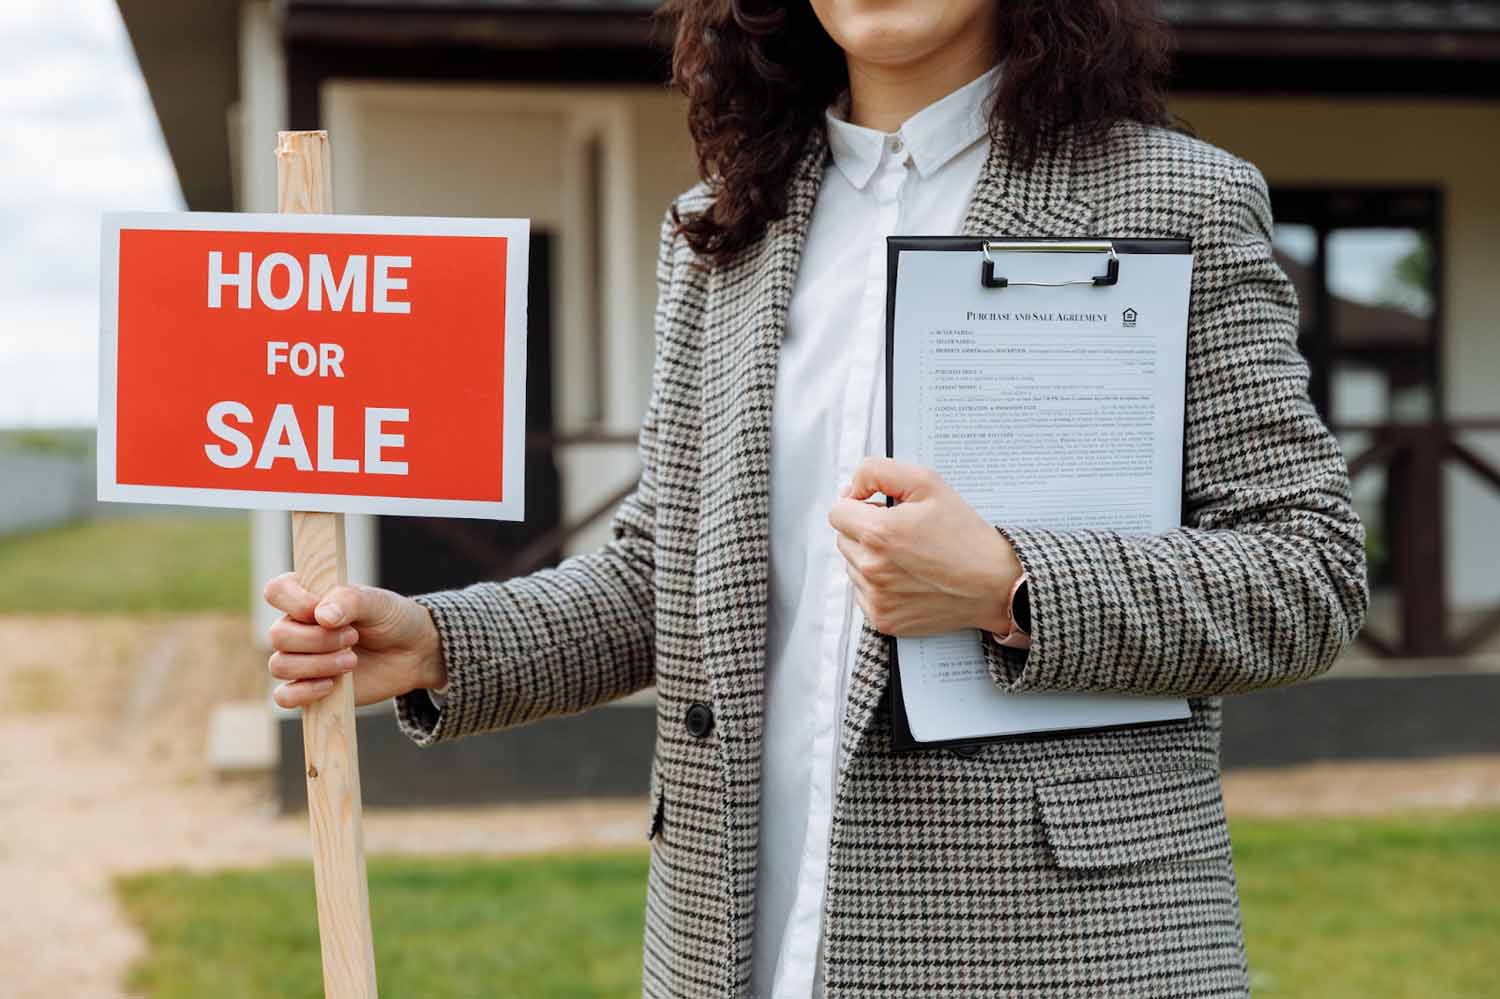 Woman in front of a house holding a Home for Sale sign and a clipboard